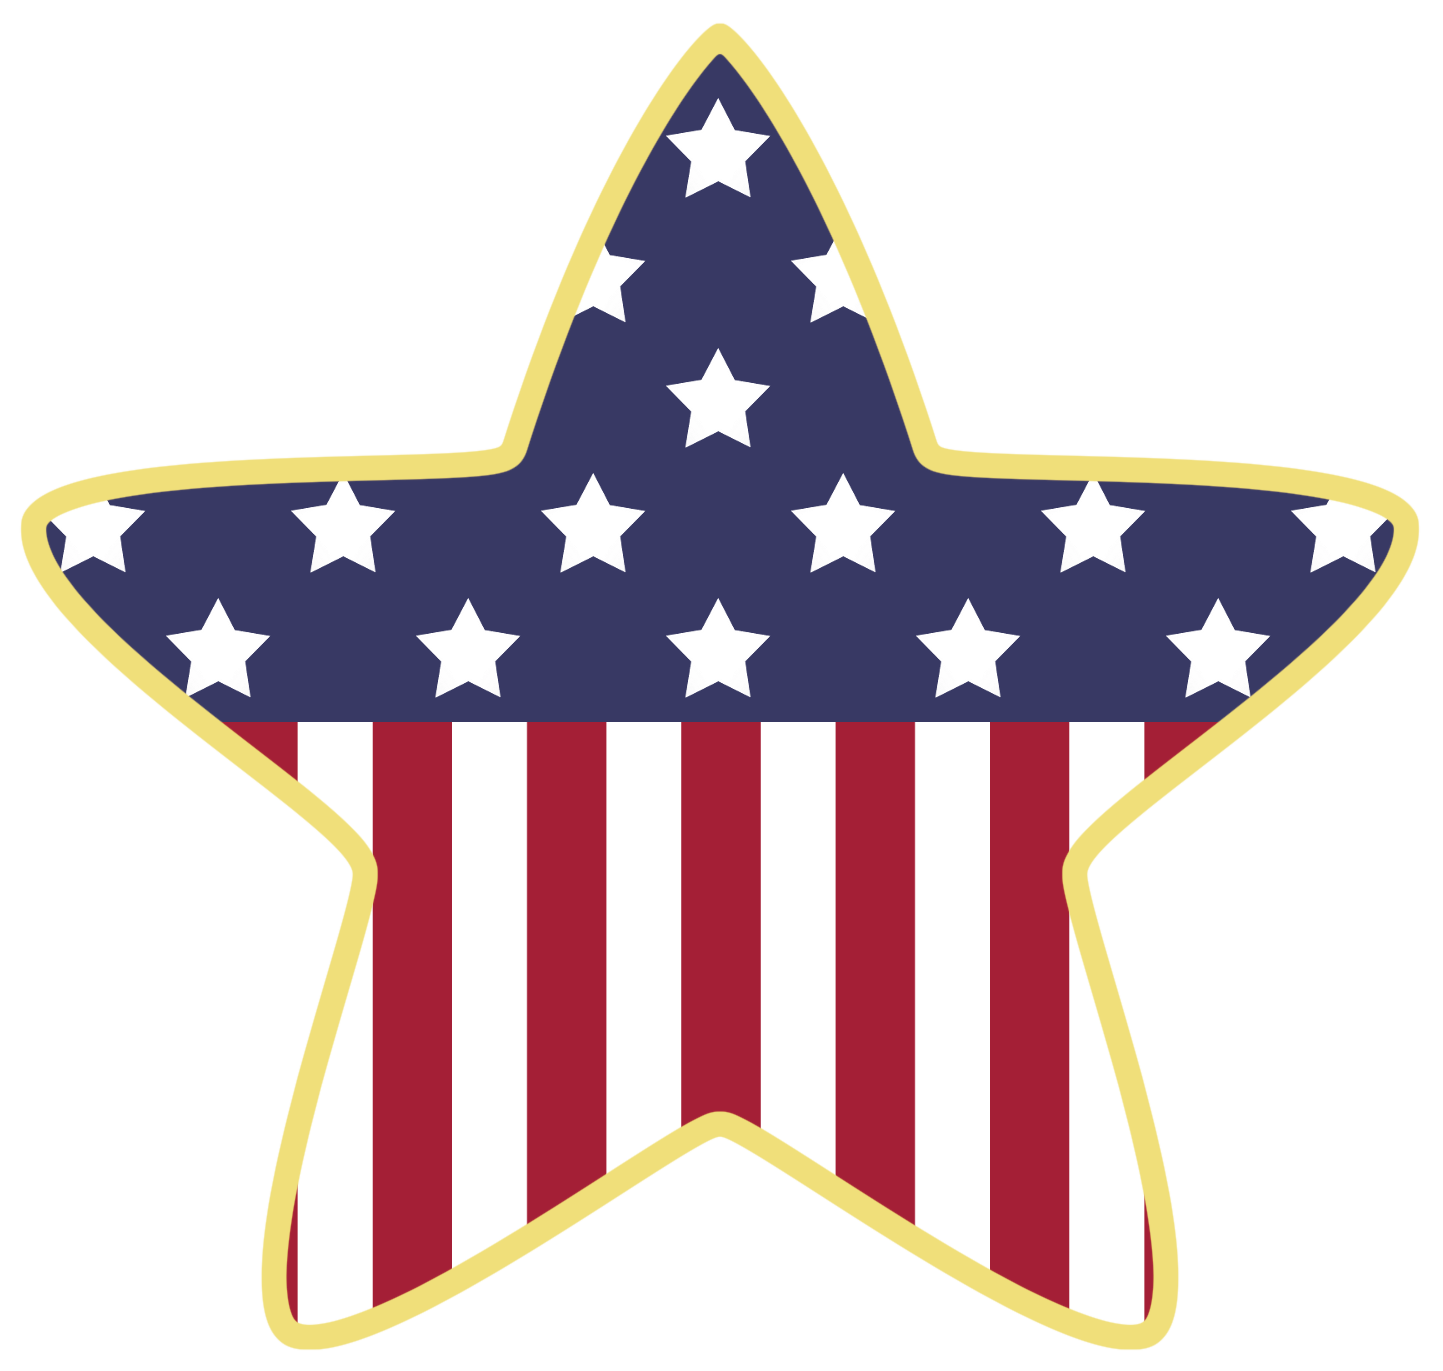 American Star Decoration PNG Clipart | July 4th Clip Art | Pinterest | Clip art, Star decorations and Star clipart